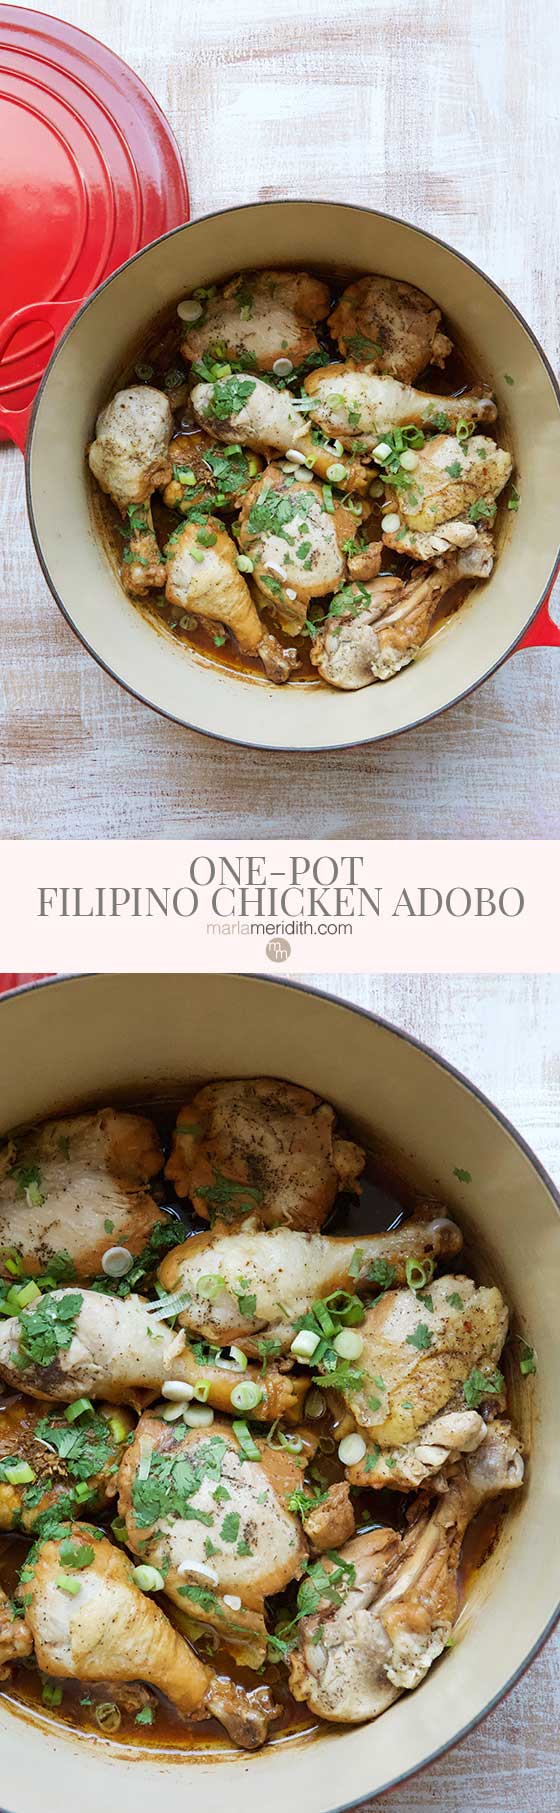 This healthy One-Pot Filipino Chicken Adobo recipe, is perfect for busy weeknight meals. Your entire family will love it and the best part is it's quick to clean up too! MarlaMeridith.com